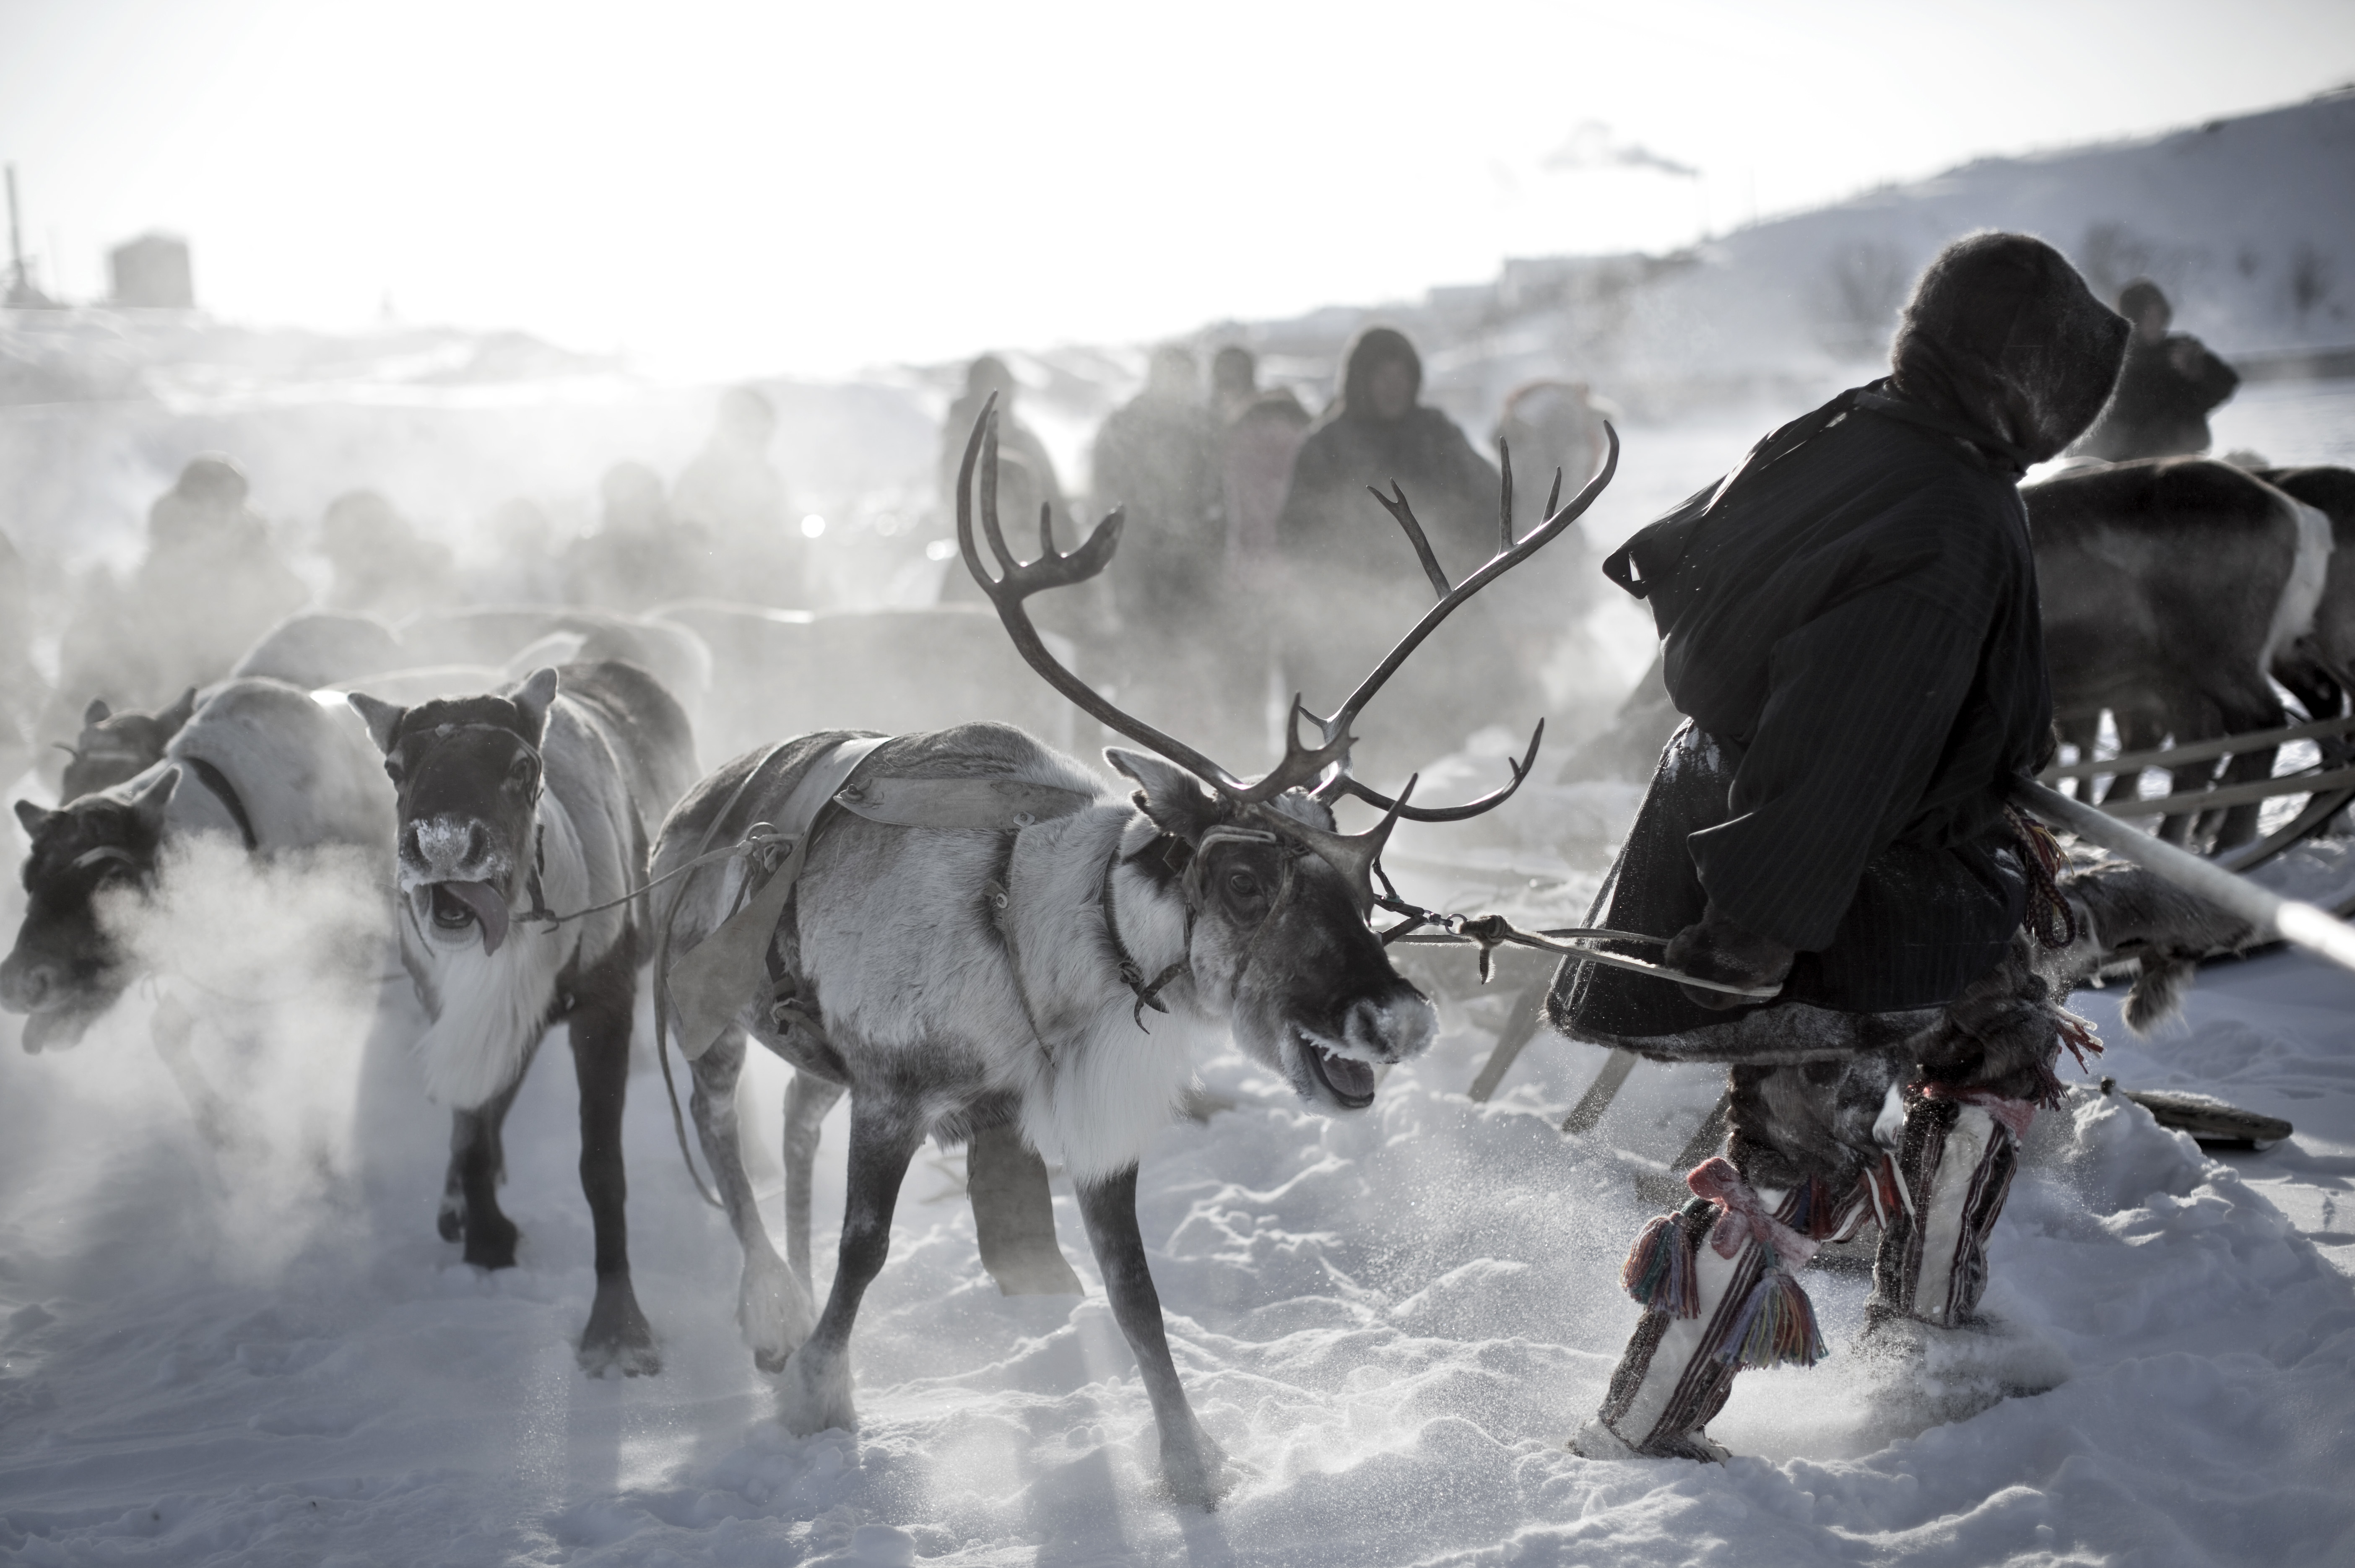 Nenet men hold a reindeer race. Photo by PW PIX/Getty Images)